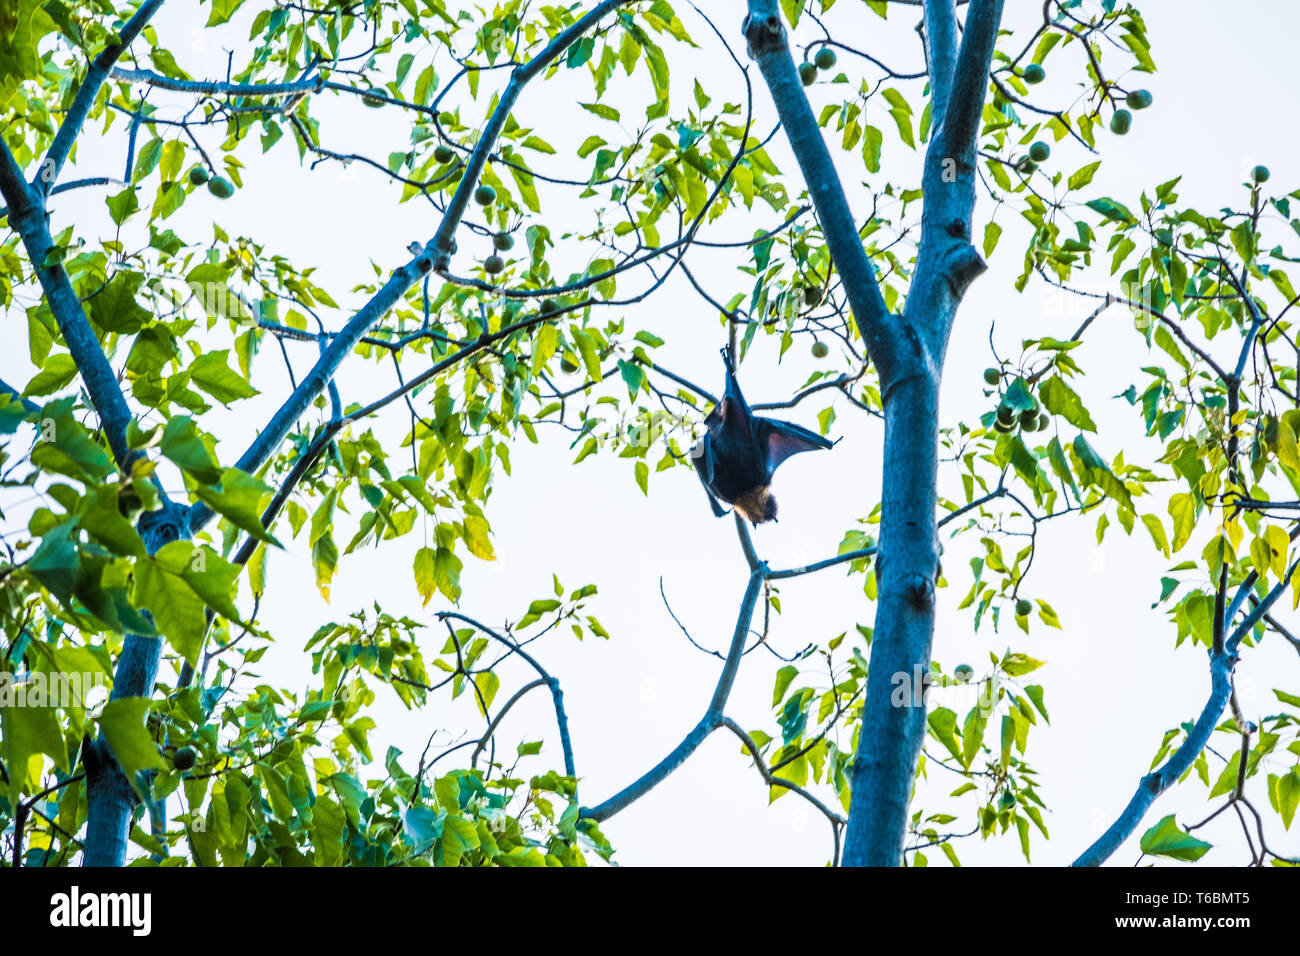 Large fruit bats (flying foxes) hanging off a tree Stock Photo